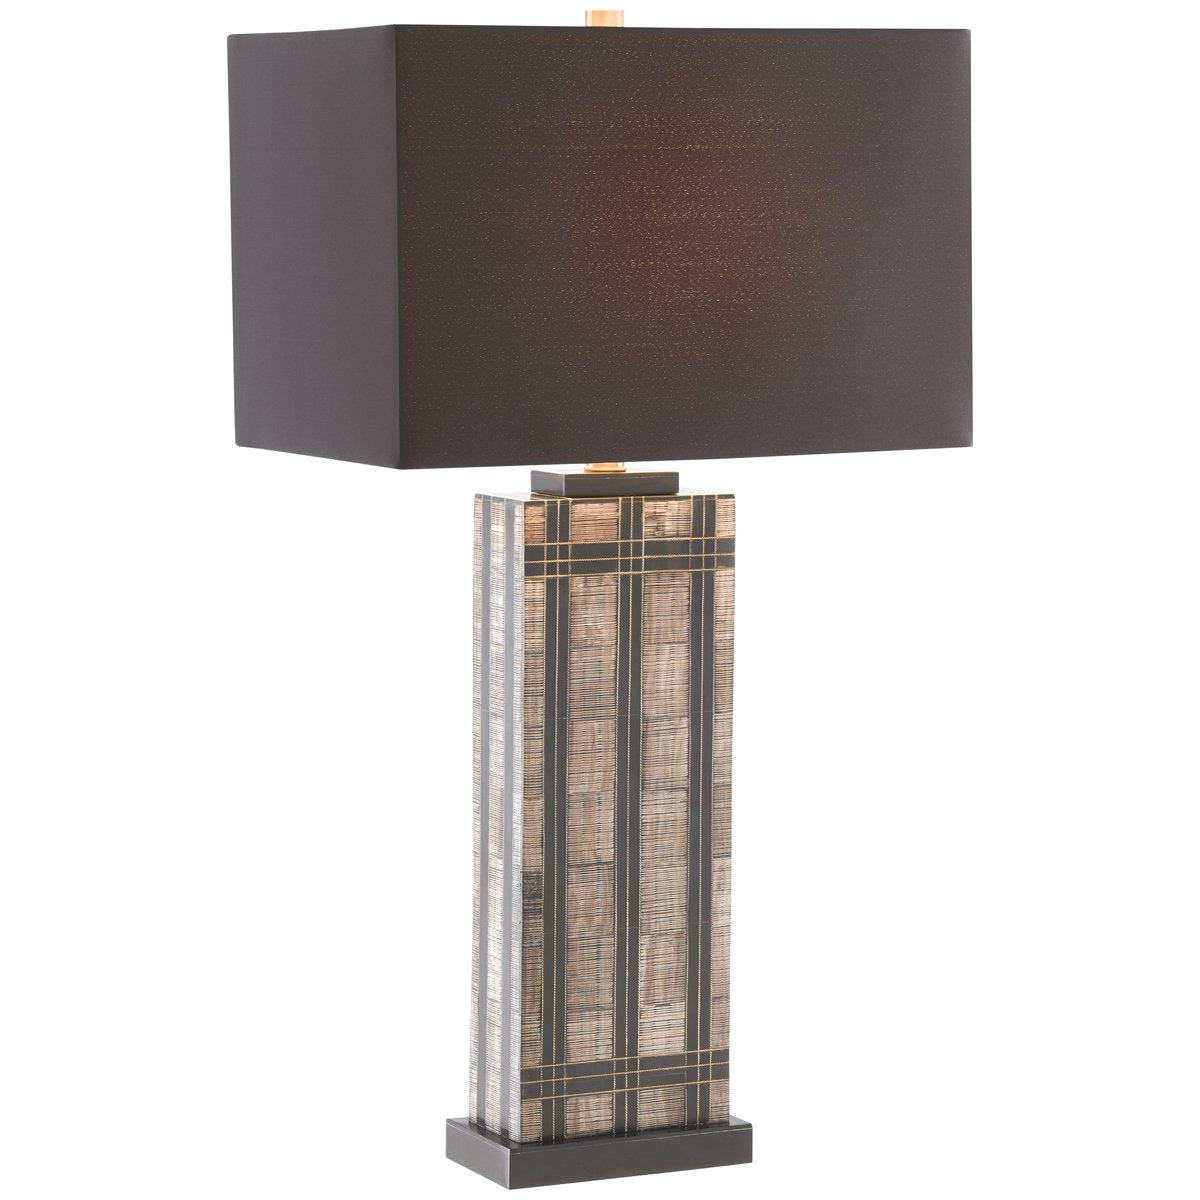 Currey and Company Gregor Table Lamp